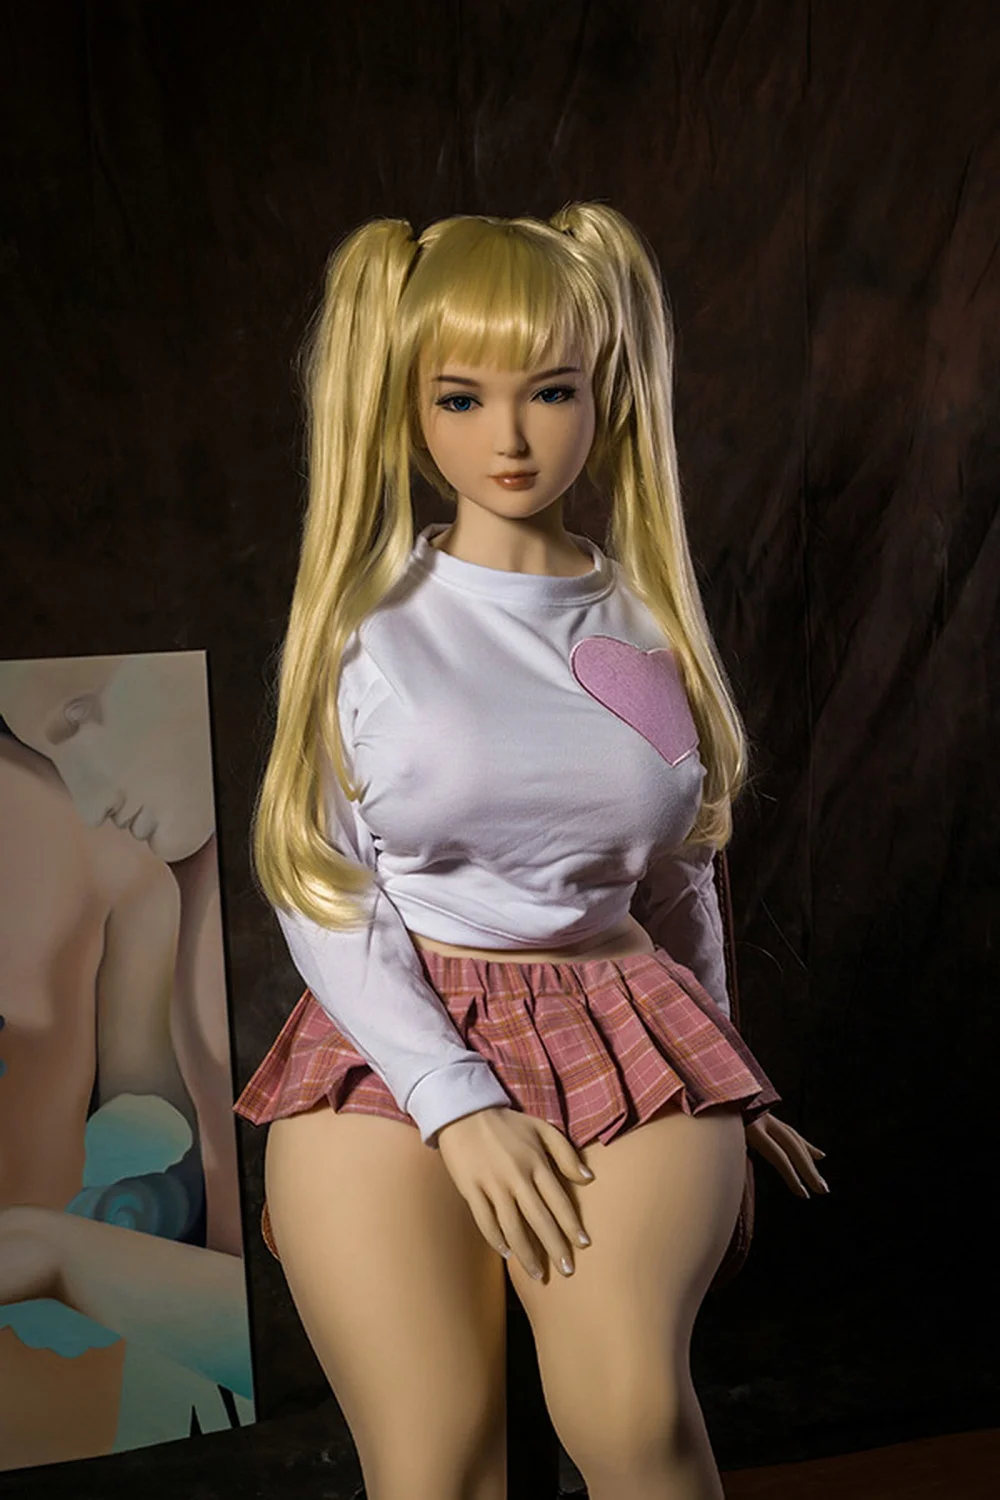 Anime sex doll sitting on a chair with hands between thighs